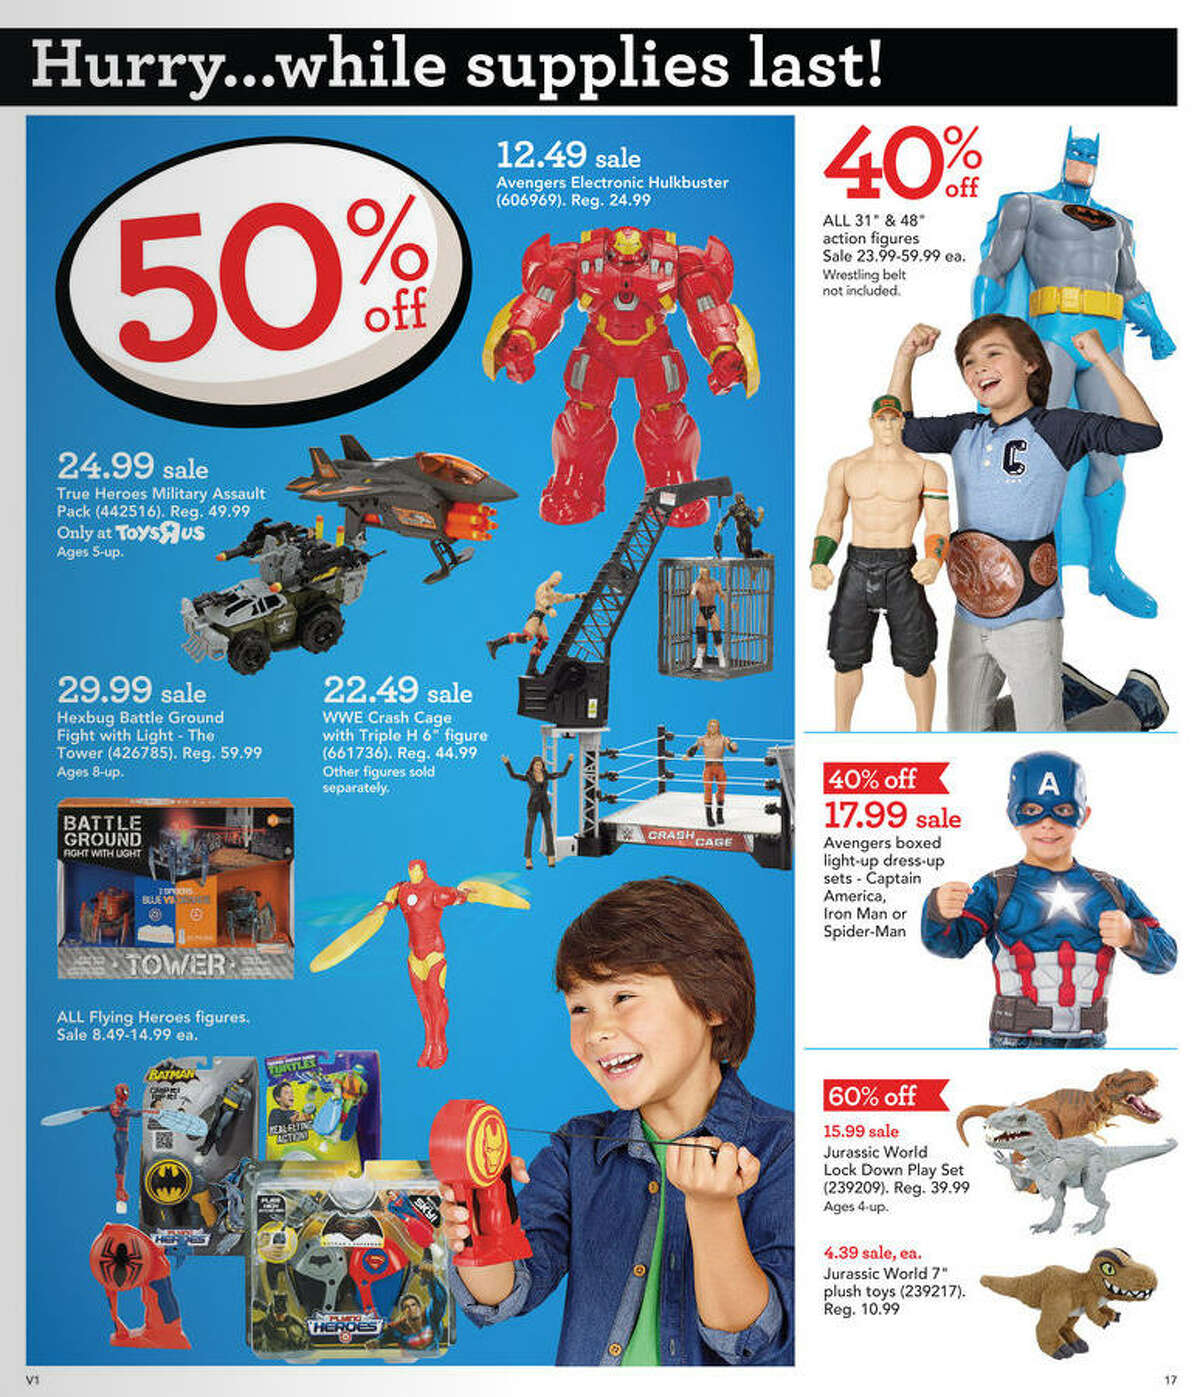 Toys "R" Us Black Friday 2016 ad circular released - Will Toys R Us Black Friday Deals Available Online